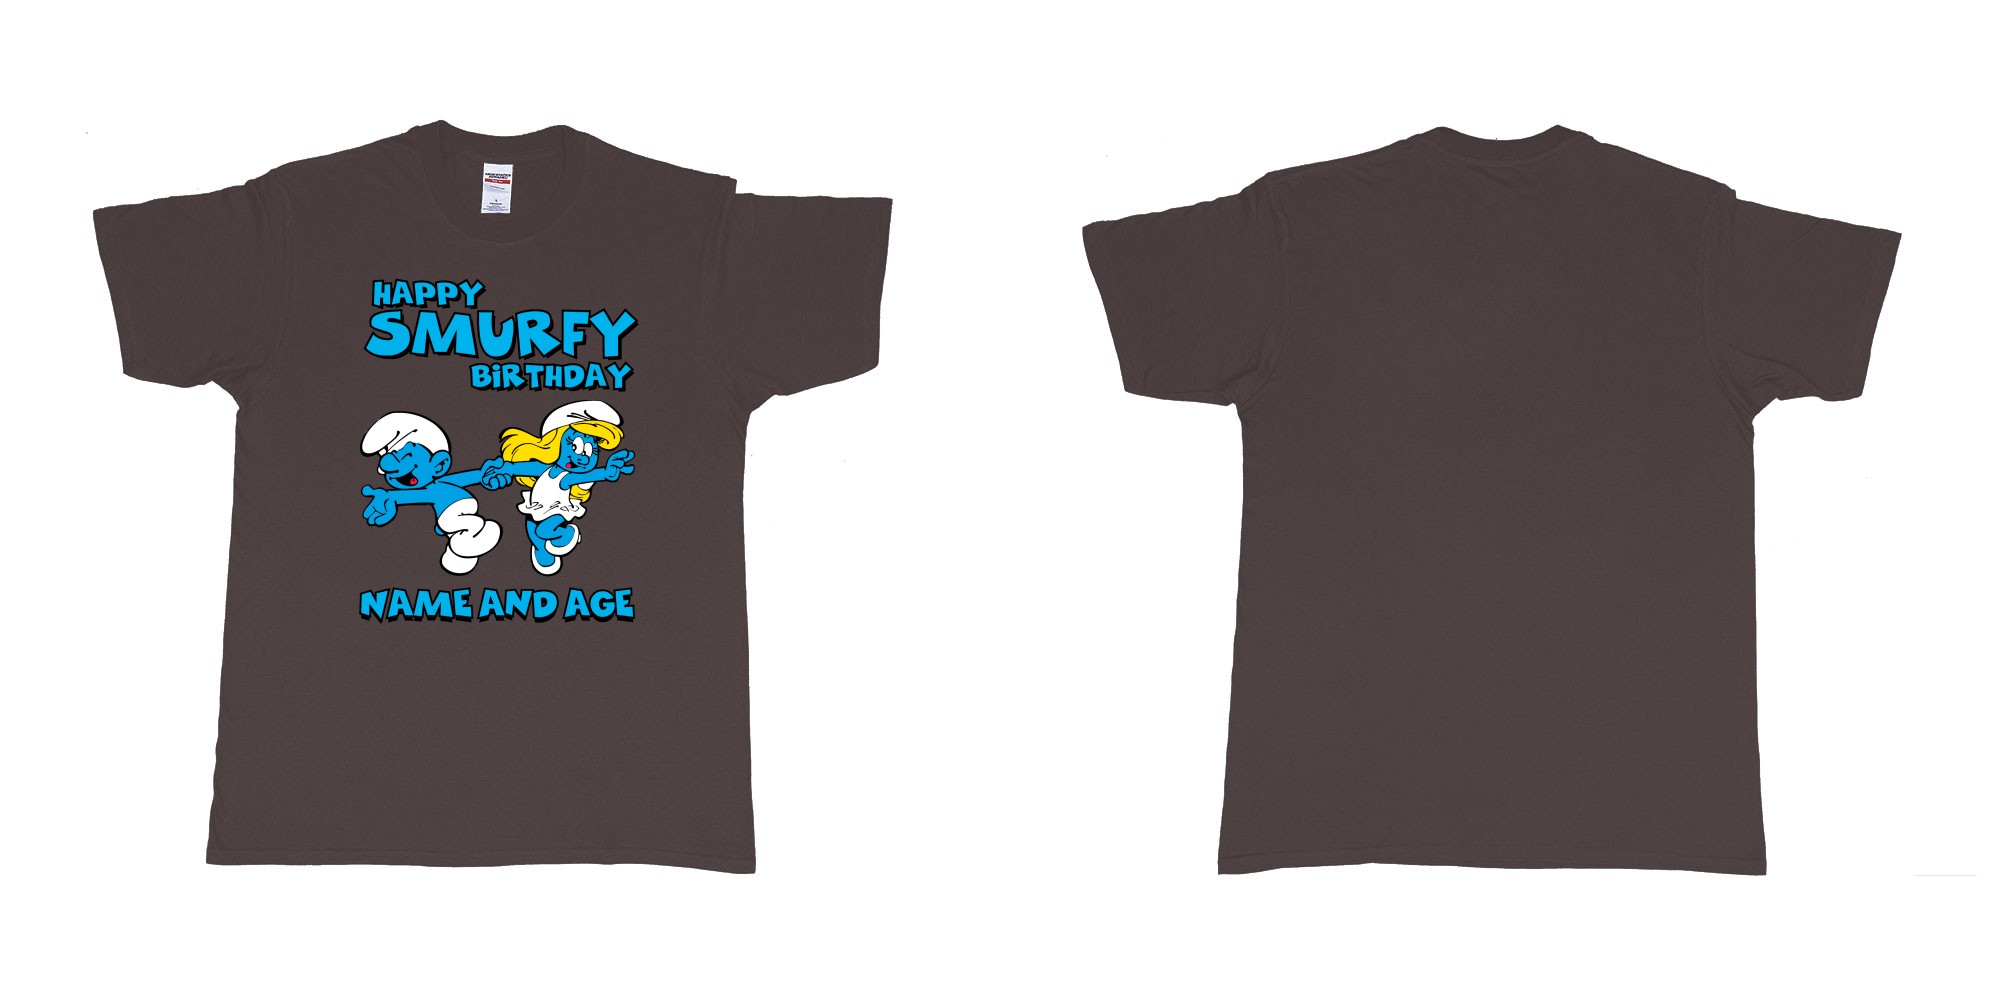 Custom tshirt design happy smurfy birthday in fabric color dark-chocolate choice your own text made in Bali by The Pirate Way